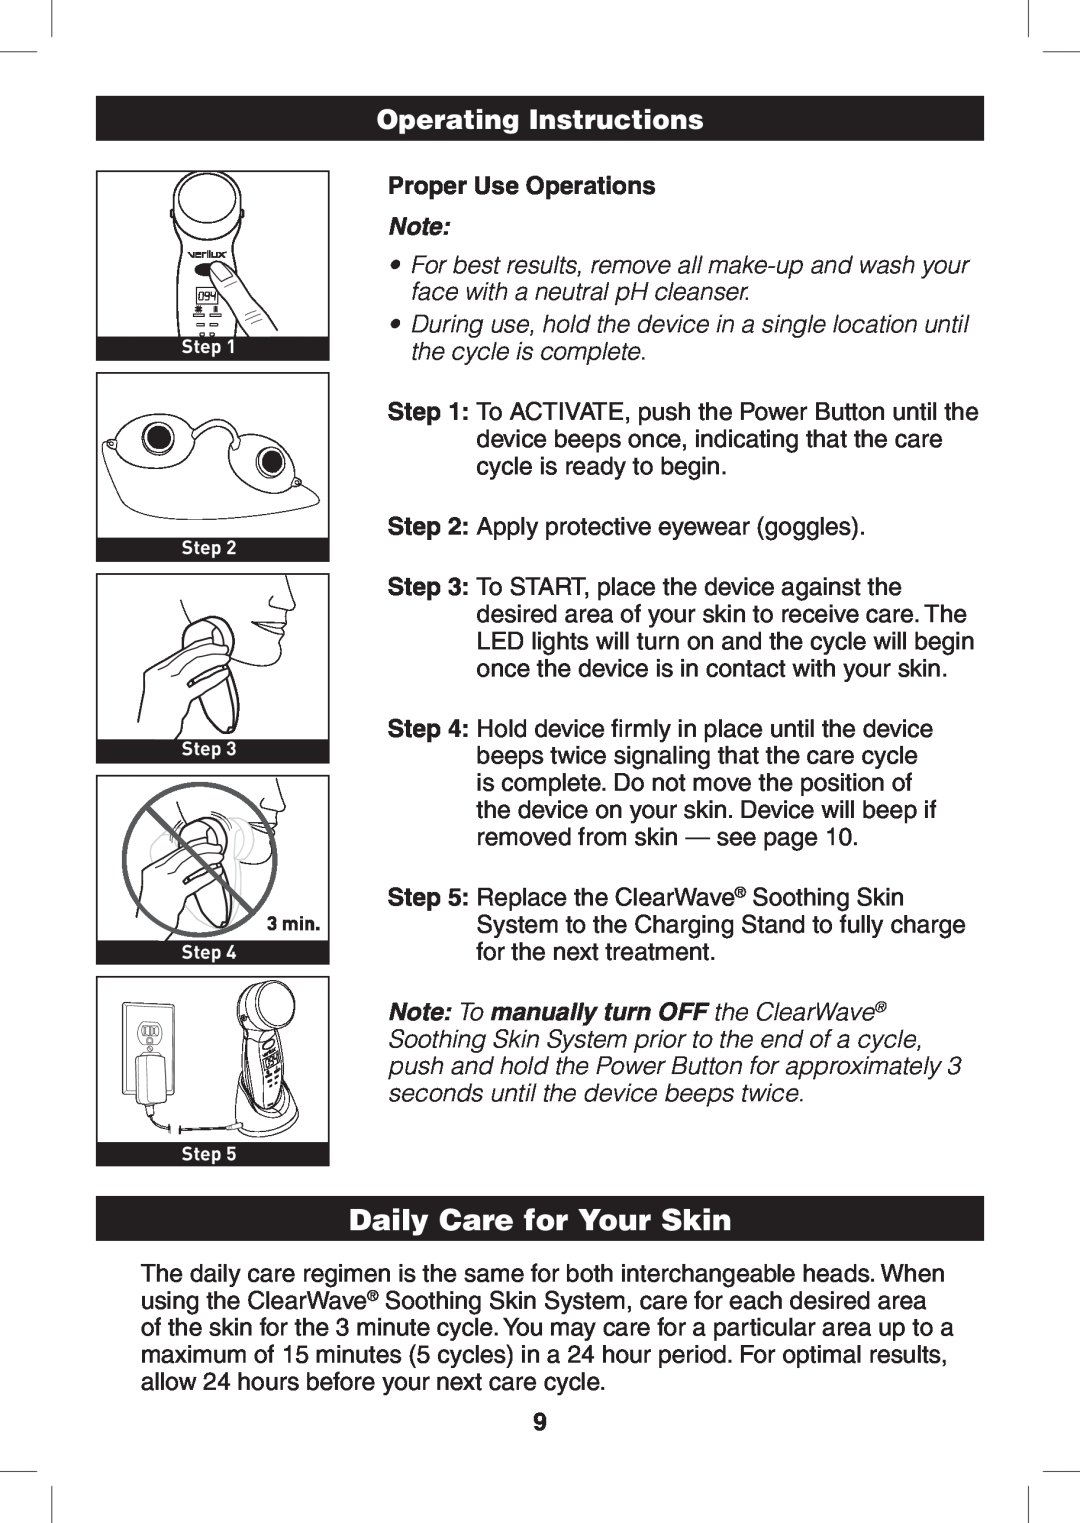 Verilux CWST2RB manual Daily Care for Your Skin, Operating Instructions, Proper Use Operations 